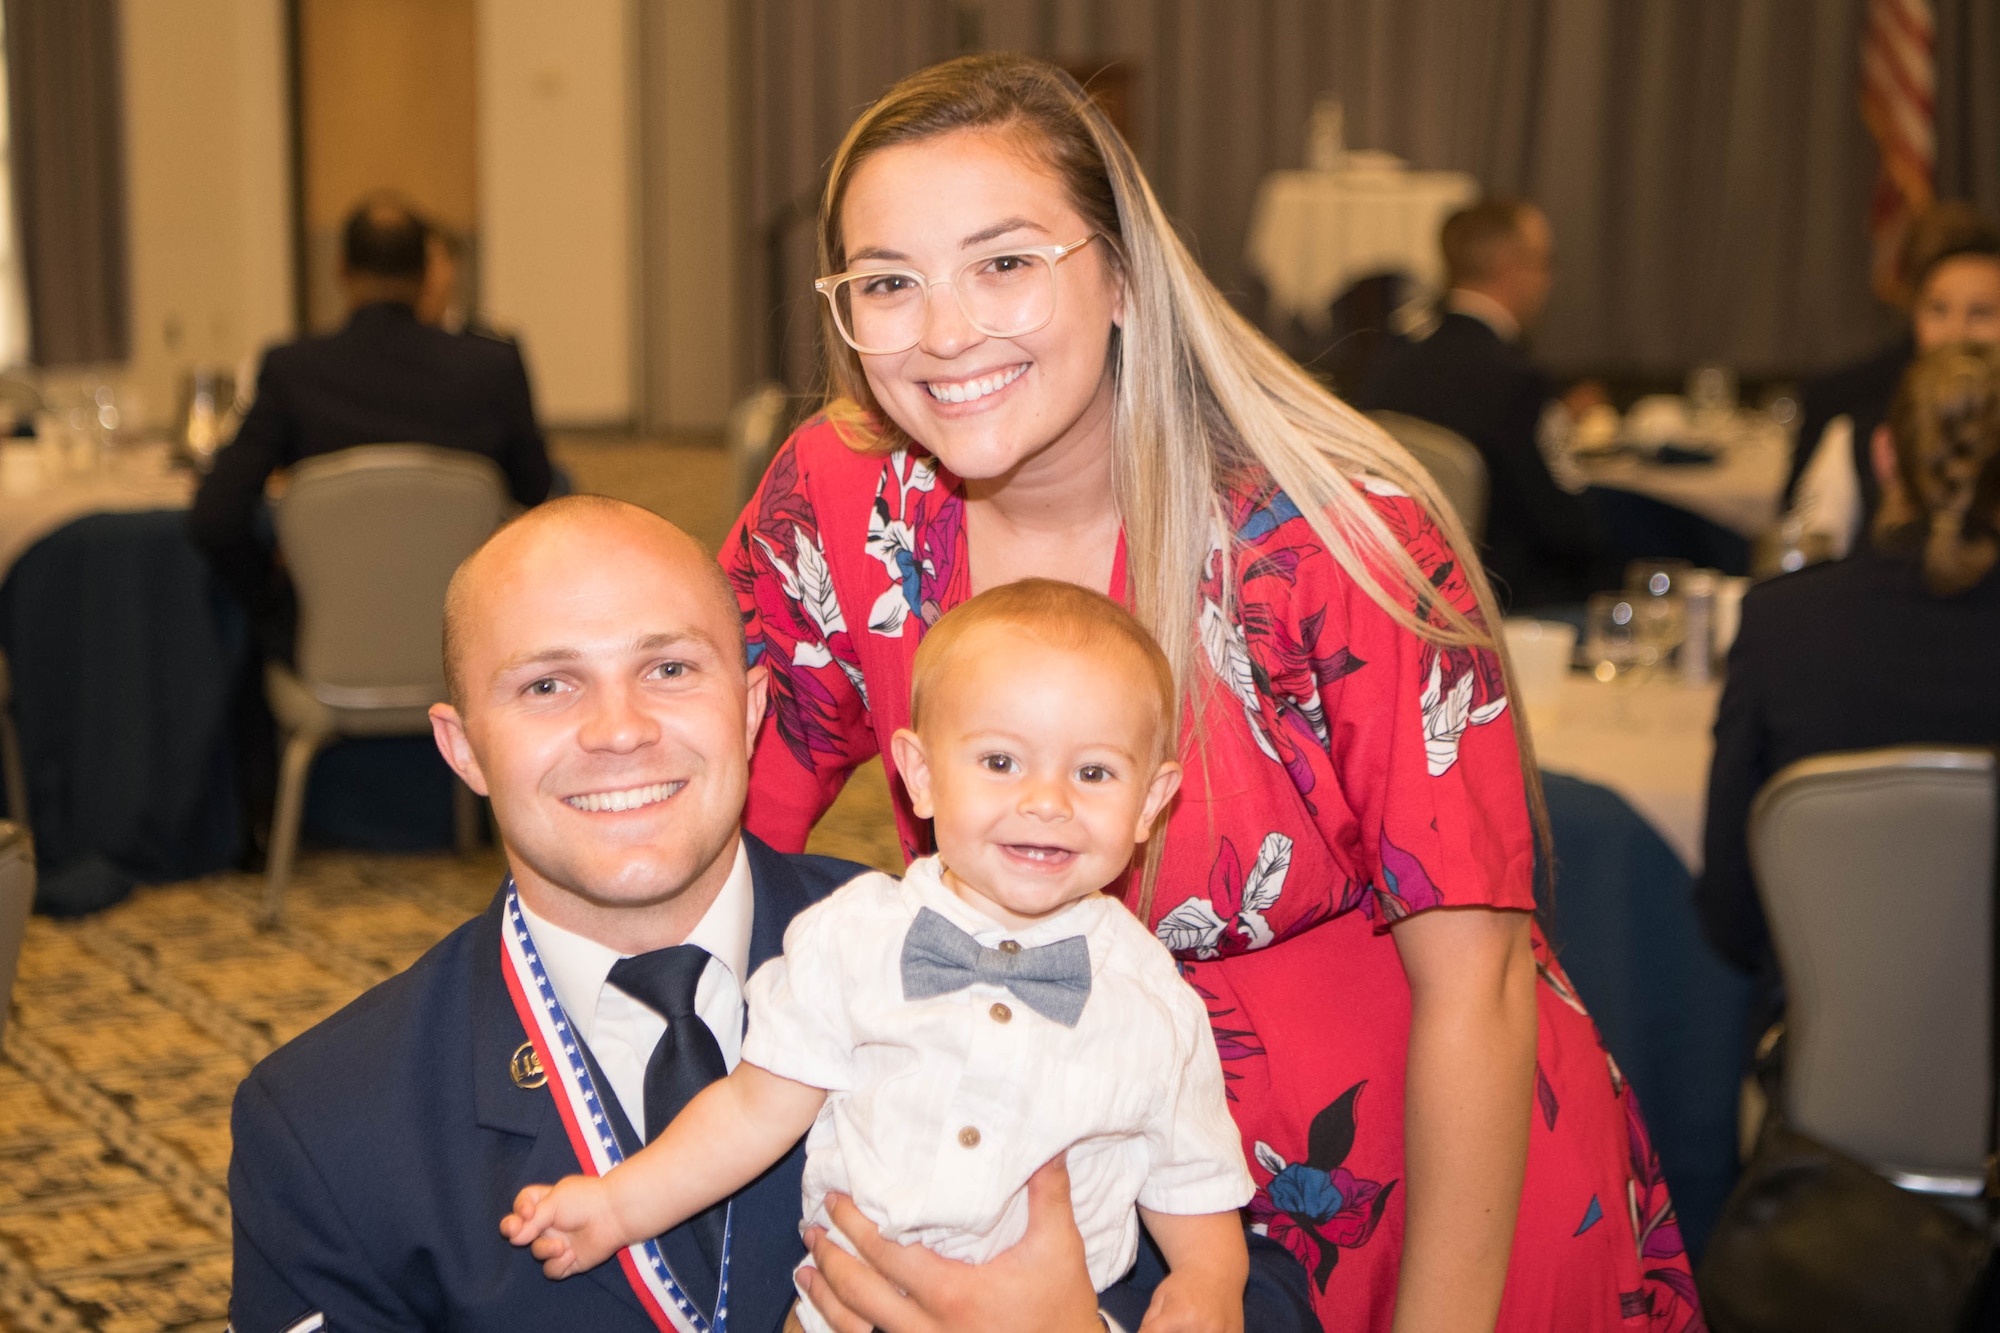 Senior Airman Austin Dean, 436th Aircraft Maintenance Squadron crew chief; his wife Ashley; and son Weston pose for a photo during the Staff Sgt. Julio Alonso Airman Leadership School, Class 21-F, dinner and graduation ceremony held at The Landings on Dover Air Force Base, Delaware, July 22, 2021. Twenty-nine Airmen graduated at the first post-COVID-19 dinner and graduation ceremony. (U.S. Air Force photo by Mauricio Campino)